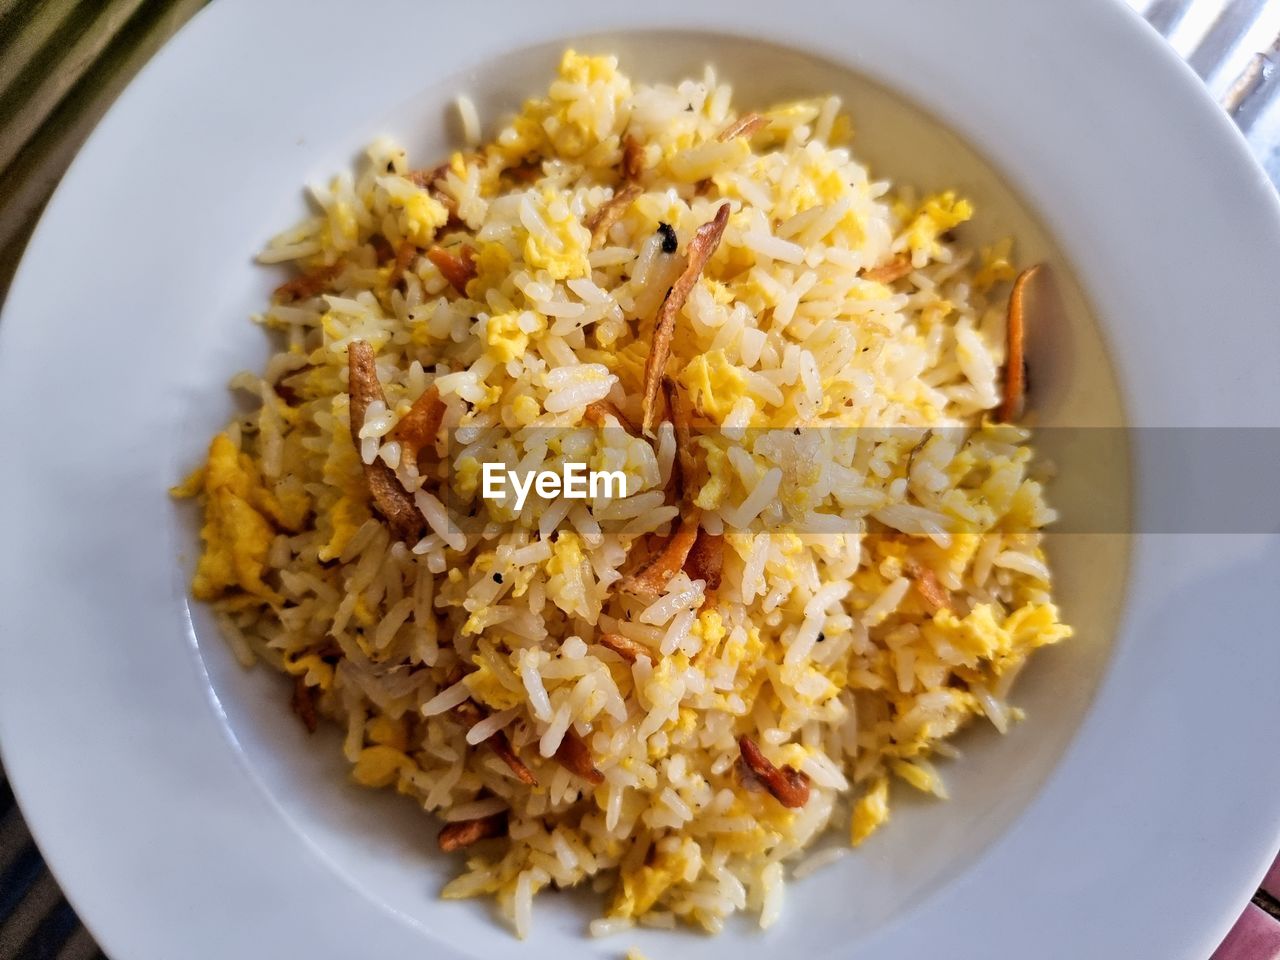 food and drink, food, healthy eating, dish, wellbeing, produce, freshness, plate, rice - food staple, high angle view, directly above, cuisine, breakfast, rice, no people, meal, indoors, close-up, vegetable, indian food, biryani, asian food, bowl